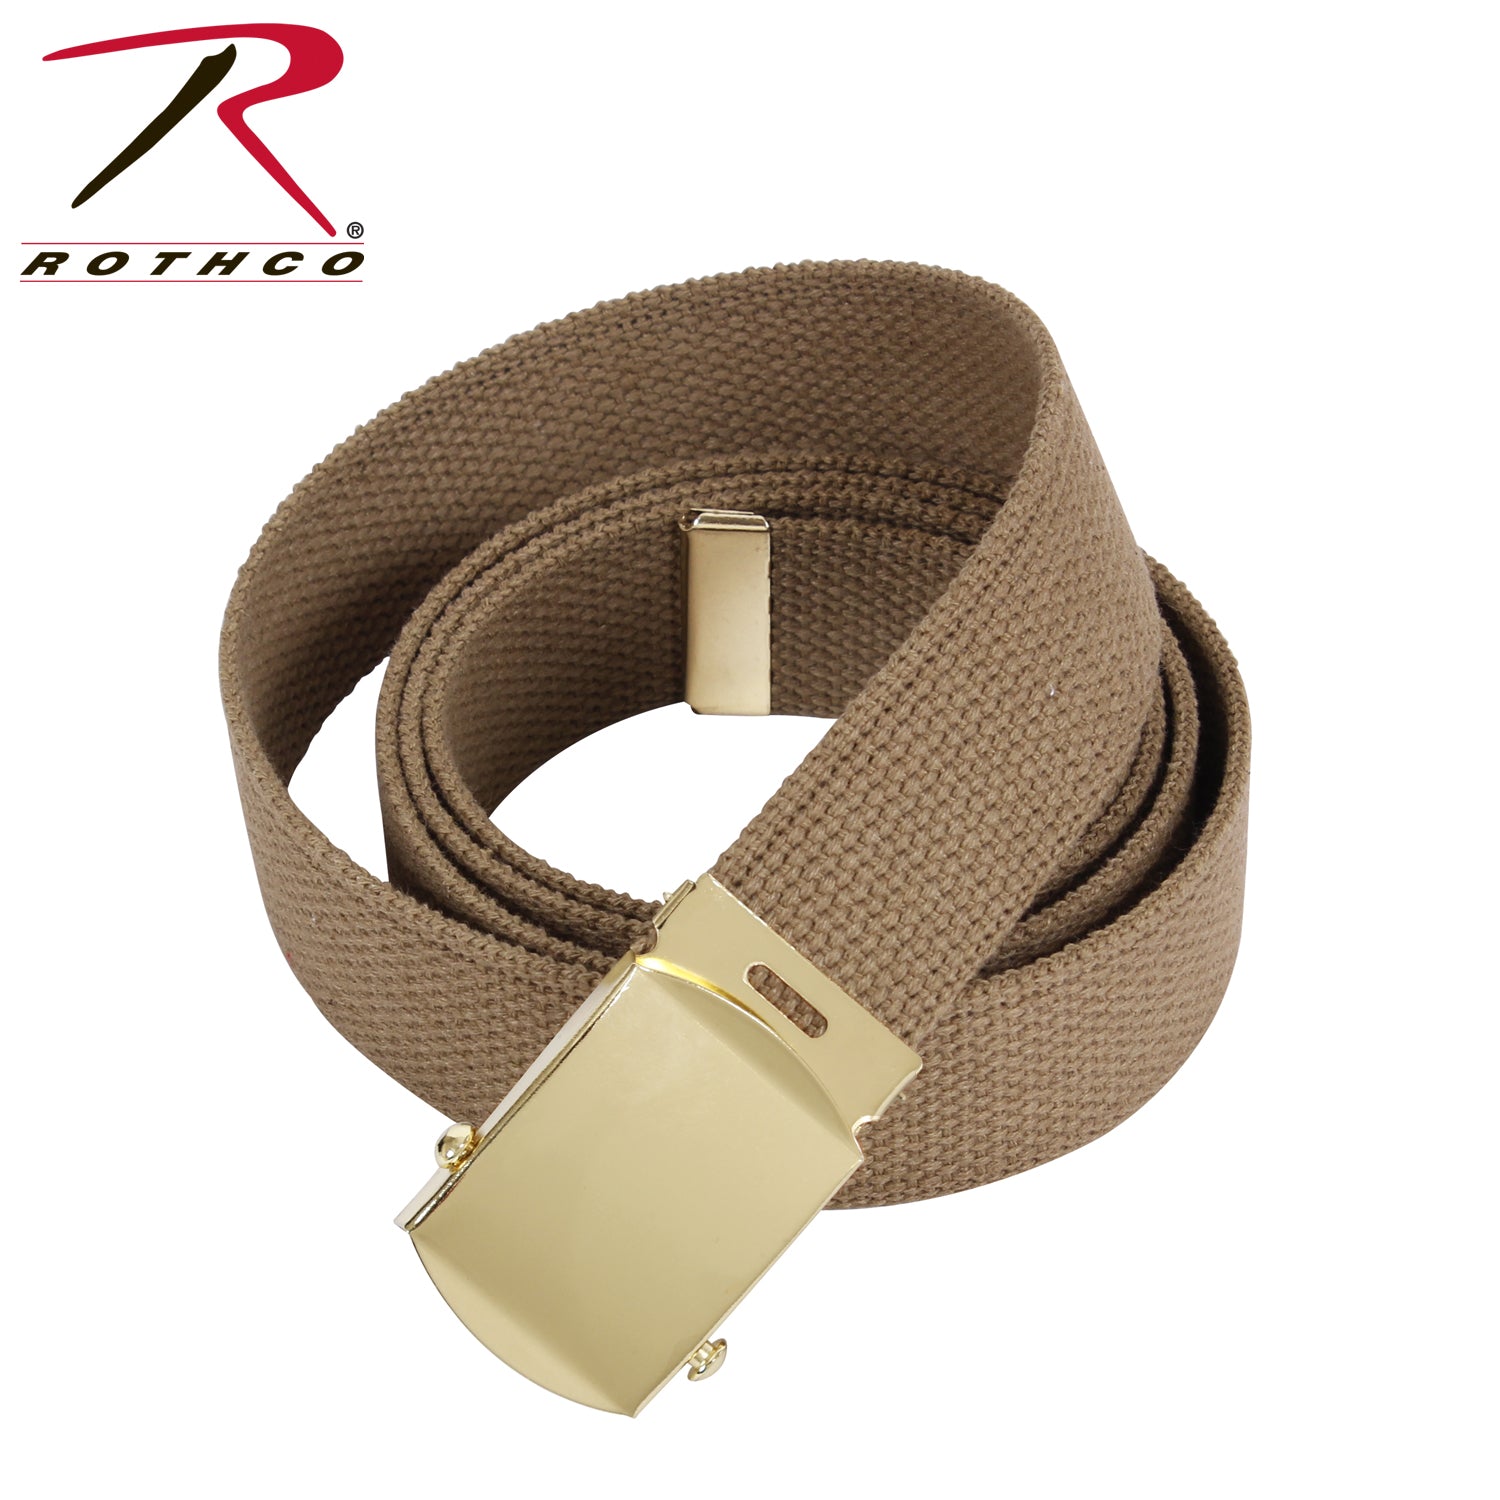 Rothco Military Web Belts - 64 Inches Long - Tactical Choice Plus